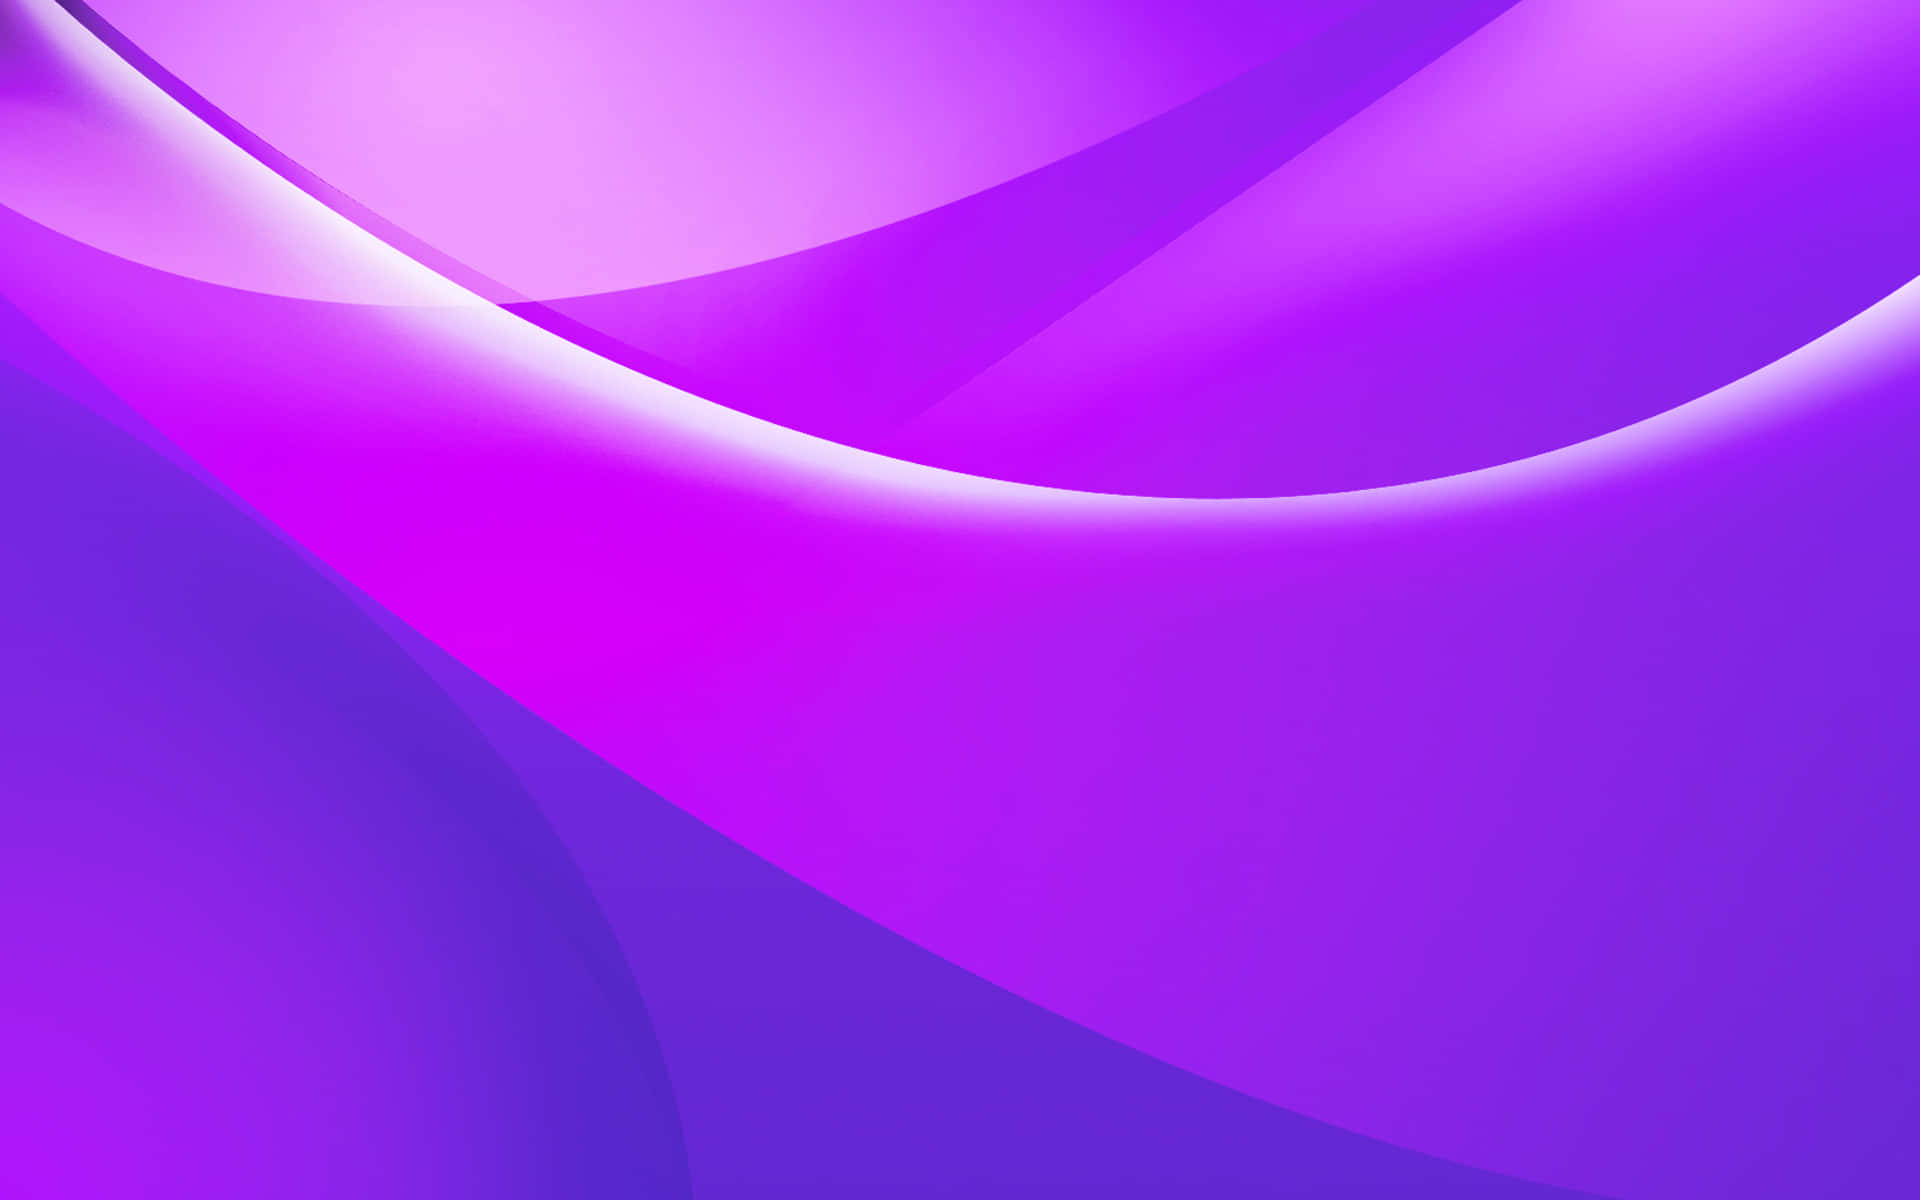 A solid purple background for your desktop